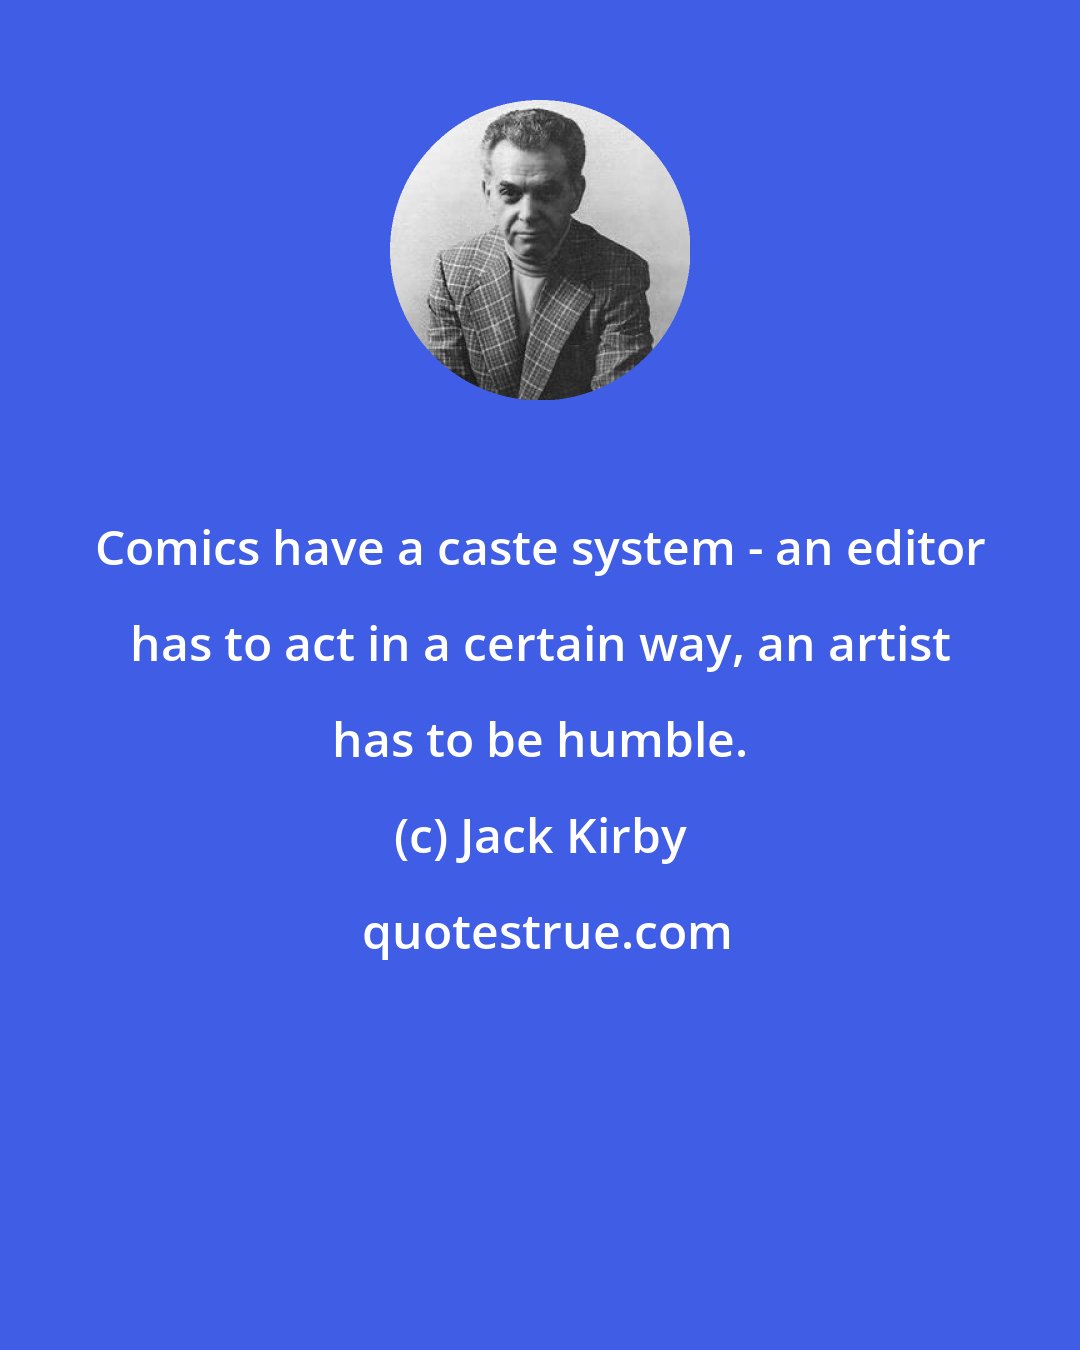 Jack Kirby: Comics have a caste system - an editor has to act in a certain way, an artist has to be humble.